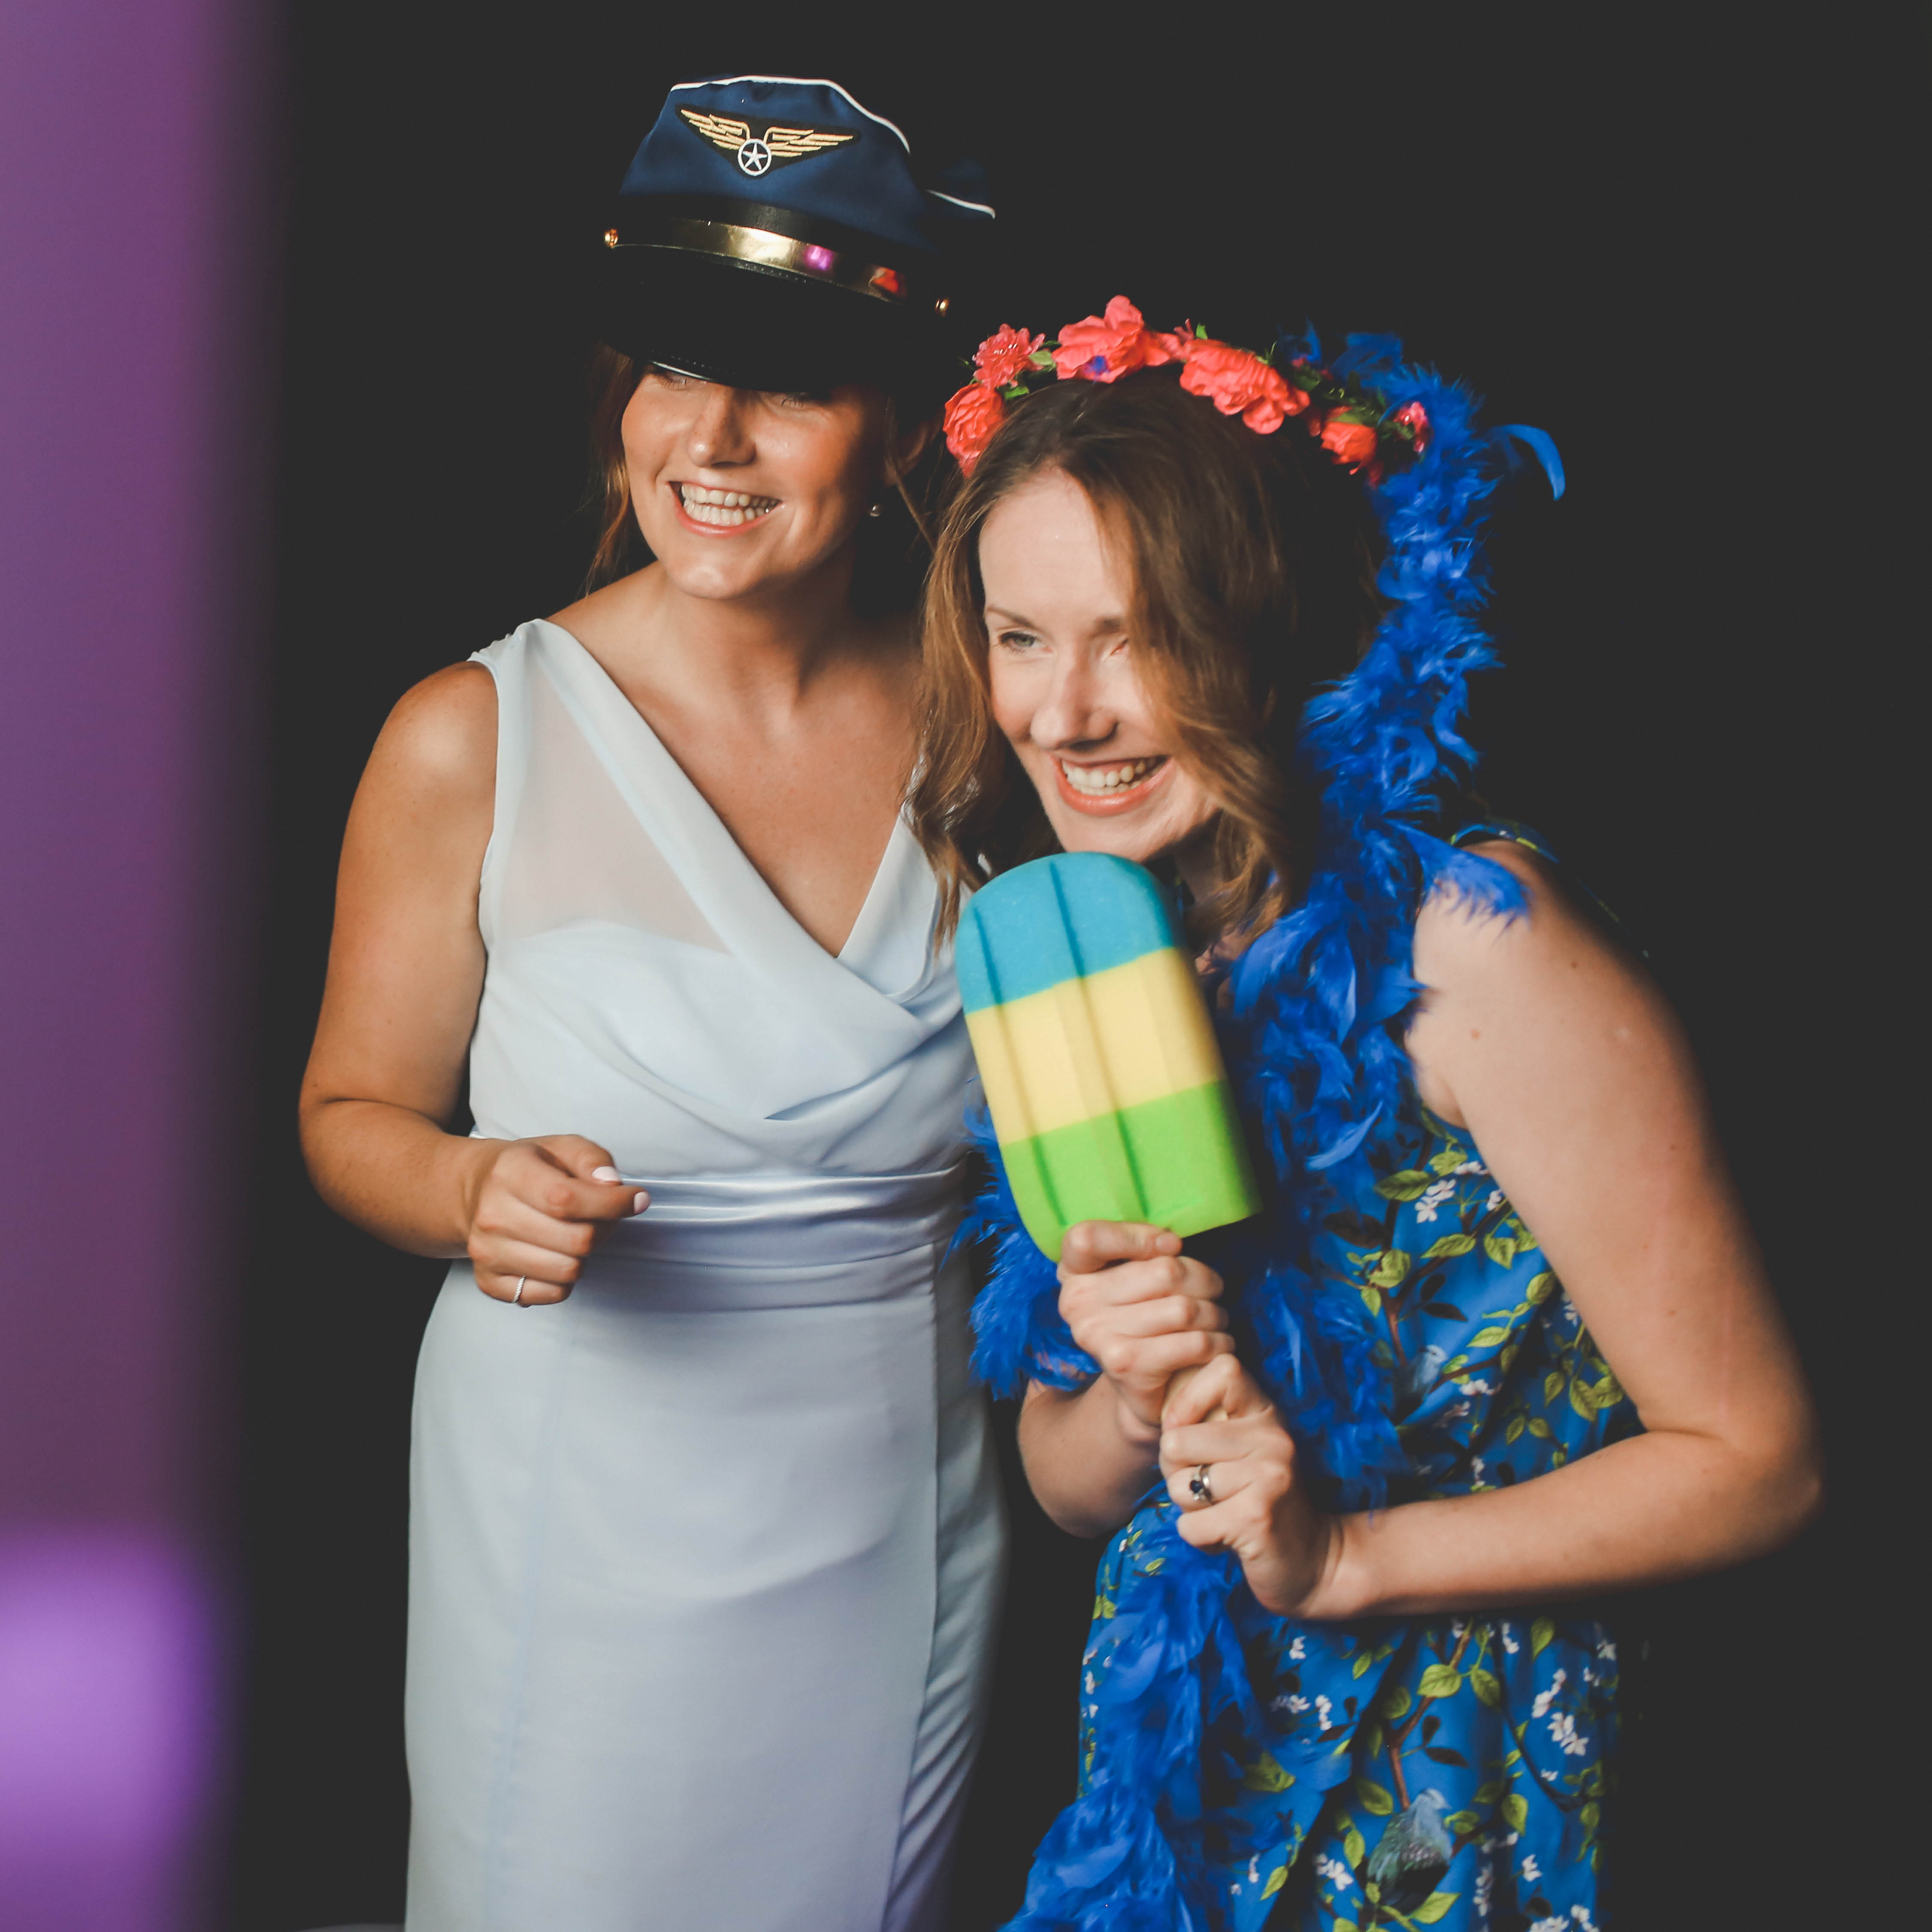 How to make your wedding day unforgettable, wedding photobooth hire